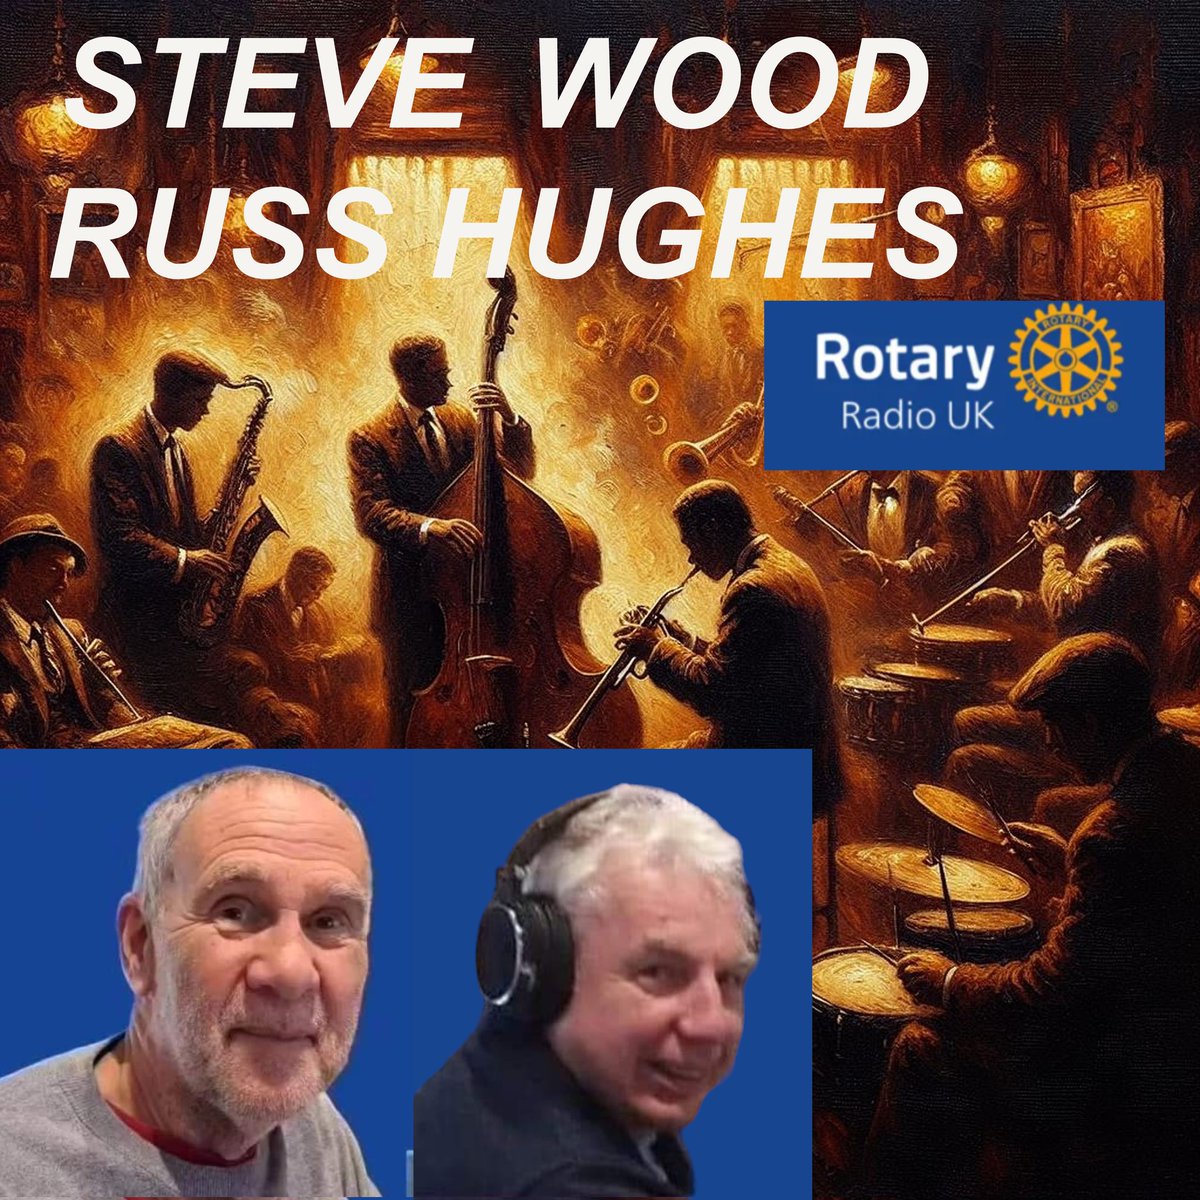 Tuesday 10am. The Steve Wood Show. Steve's album of the week continues. The Brain Teaser plus lots of music and chat Russ Hughes at 12.30 with good company and more great music. Online & On Alexa. rotaryradiouk.org.